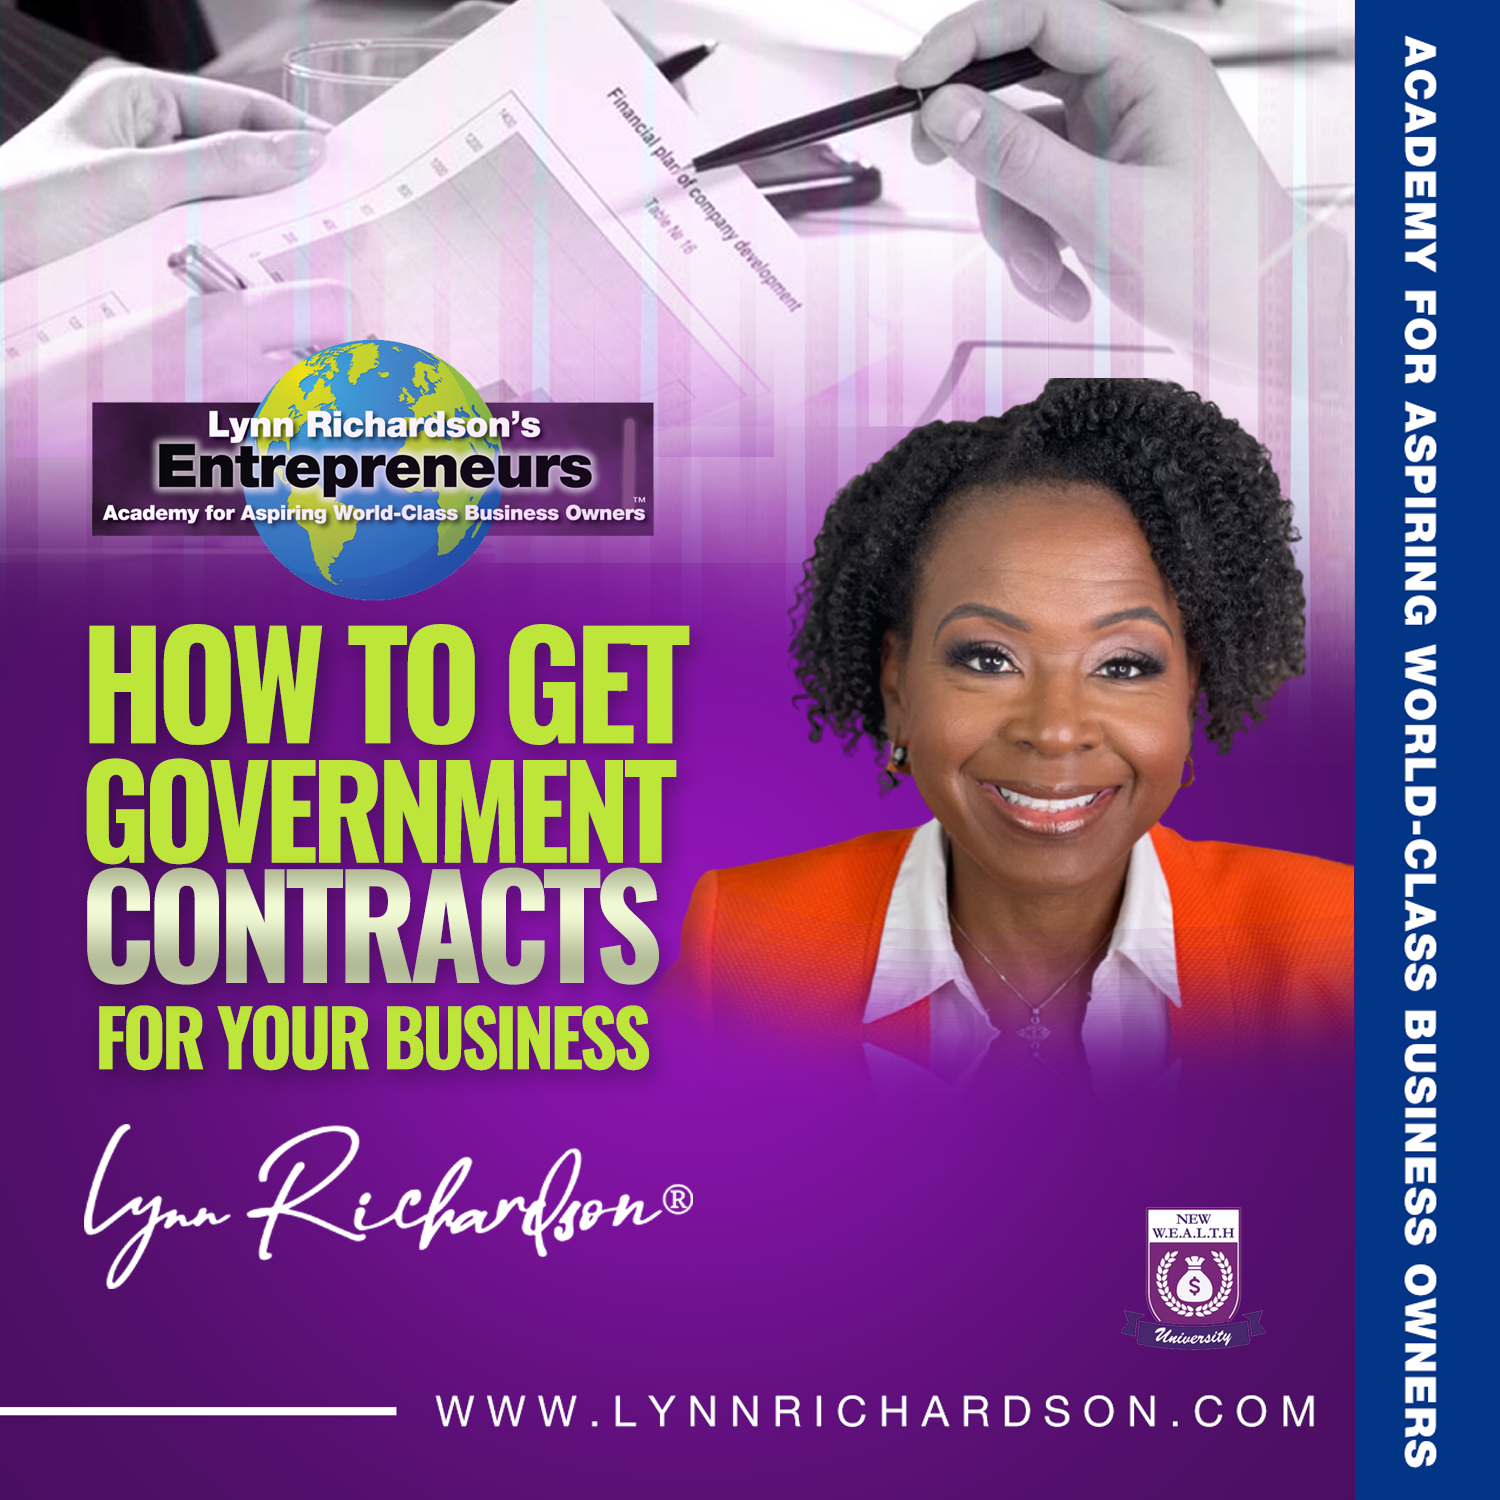 How to Get Government Contracts for Your Business